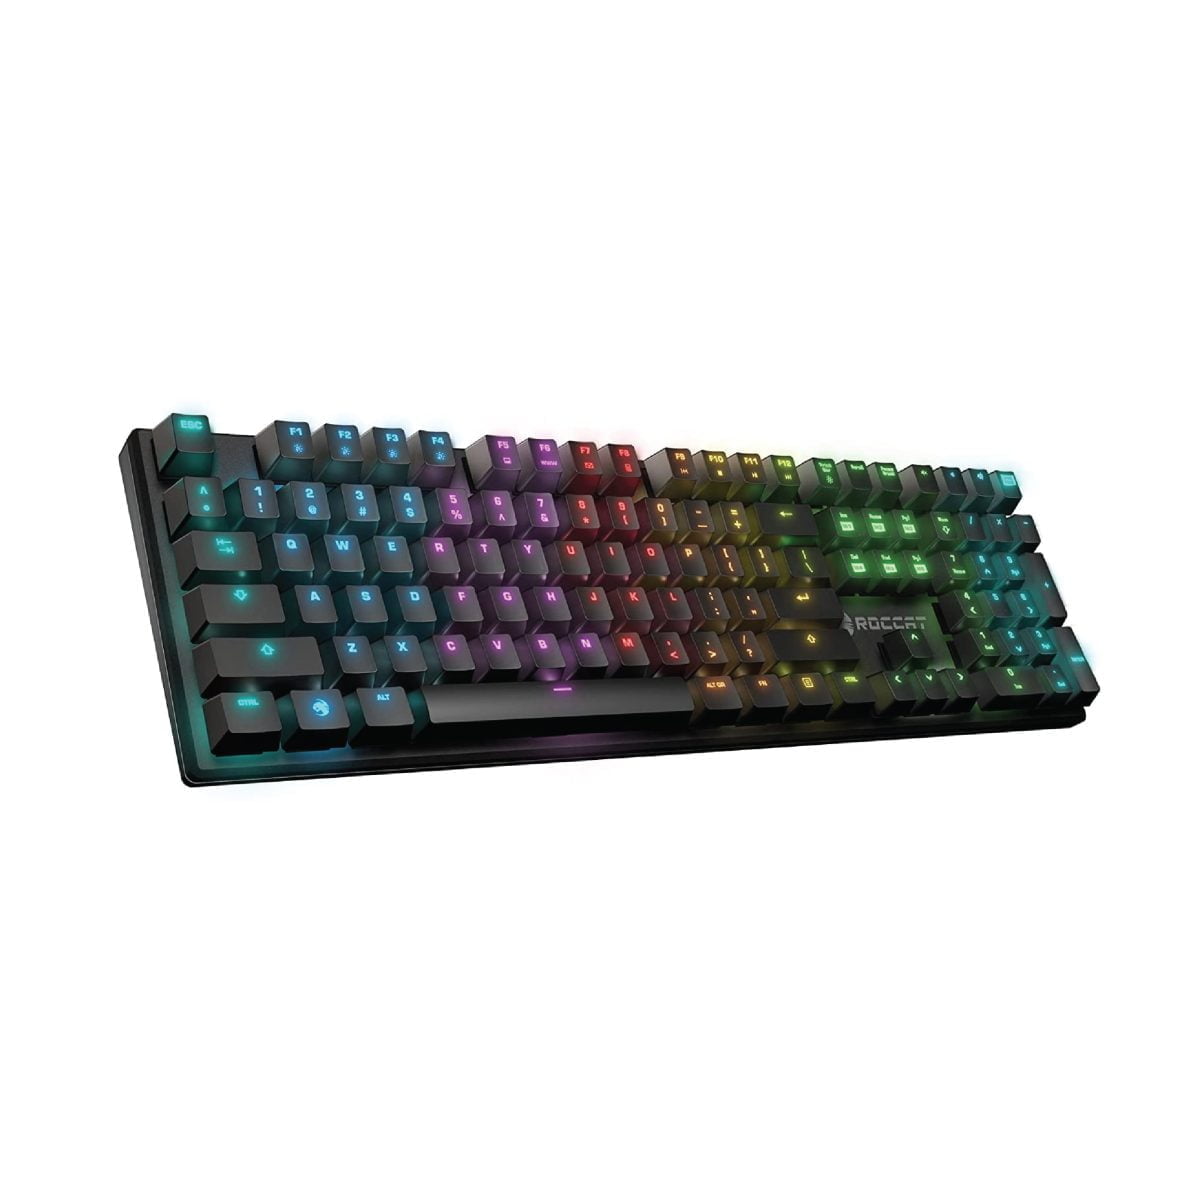 Ramadan2 23 Roccat 16.8M Color Key Back-Lighting With Quick Access To Stunning Effects Plus F1-F4 Key Lighting Fx Presets Quick Toggle: Wave, Breathing, Ripple, Solid Roccat Roccat Suora Fx - Rgb Illuminated Frameless Mechanical Gaming Keyboard